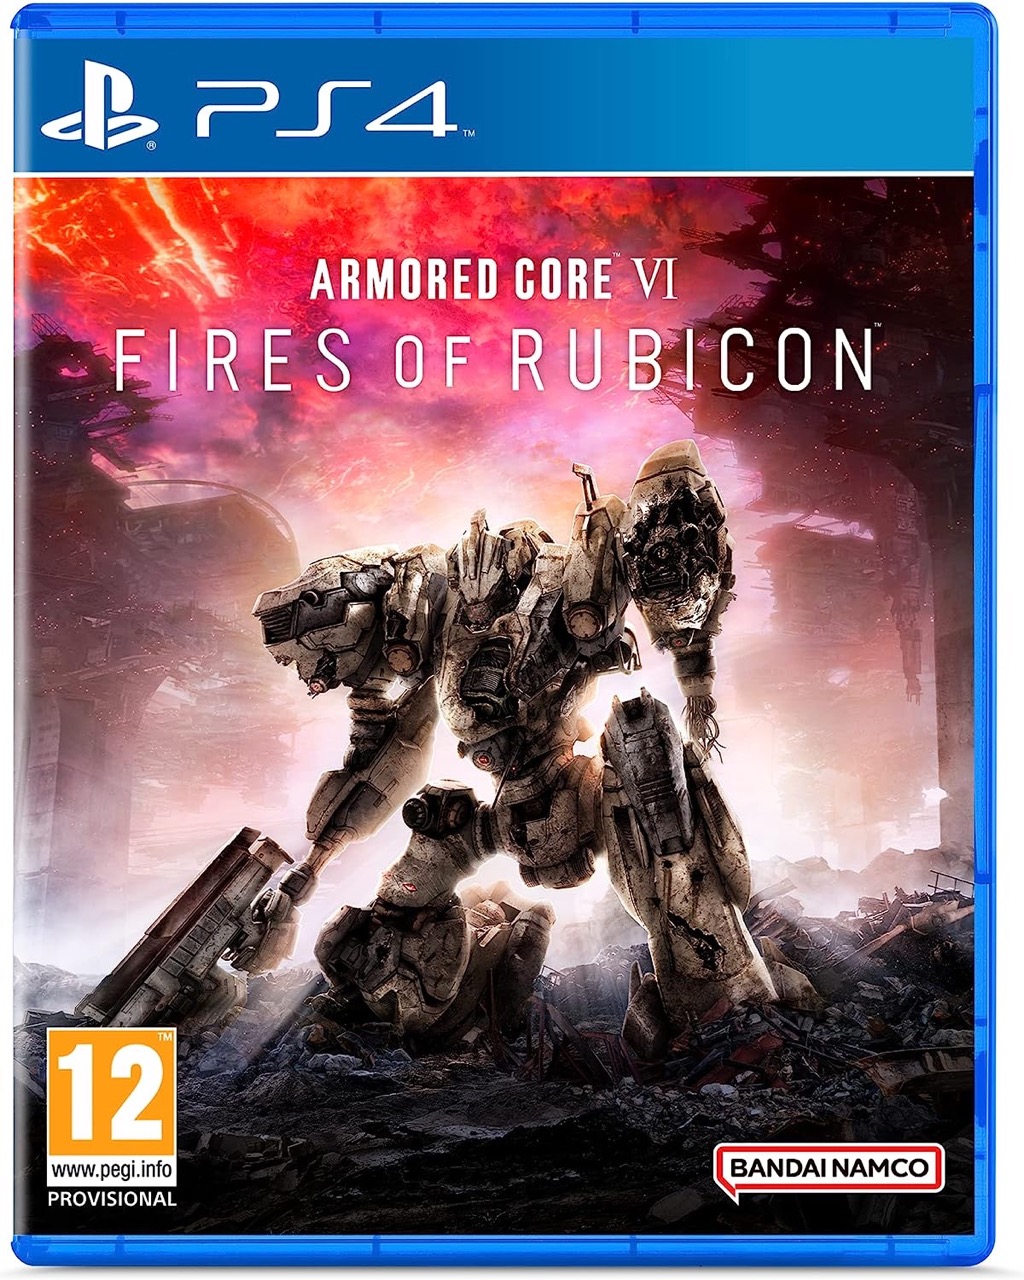 Armored Core VI: Fires of Rubicon - Launch Edition (輸入版) - PS4 